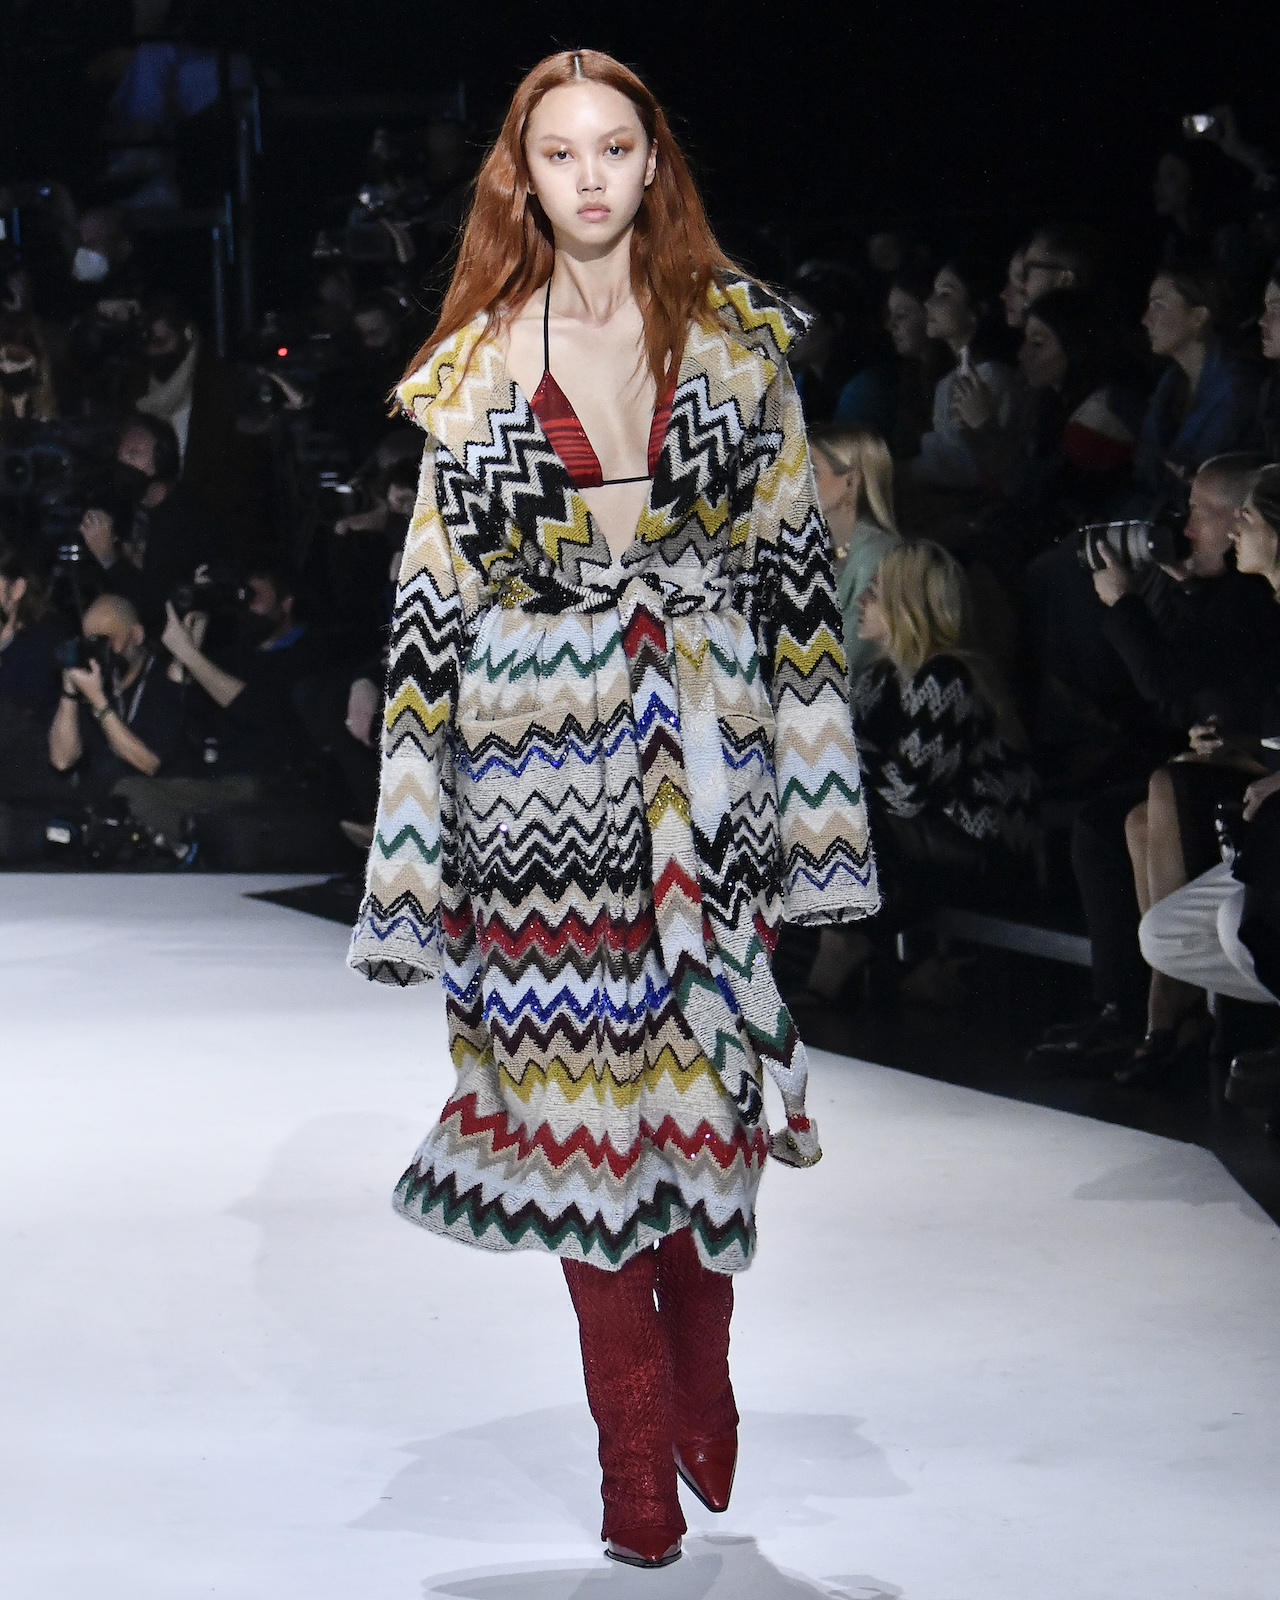  A look from Missoni's Fall 2022 show.